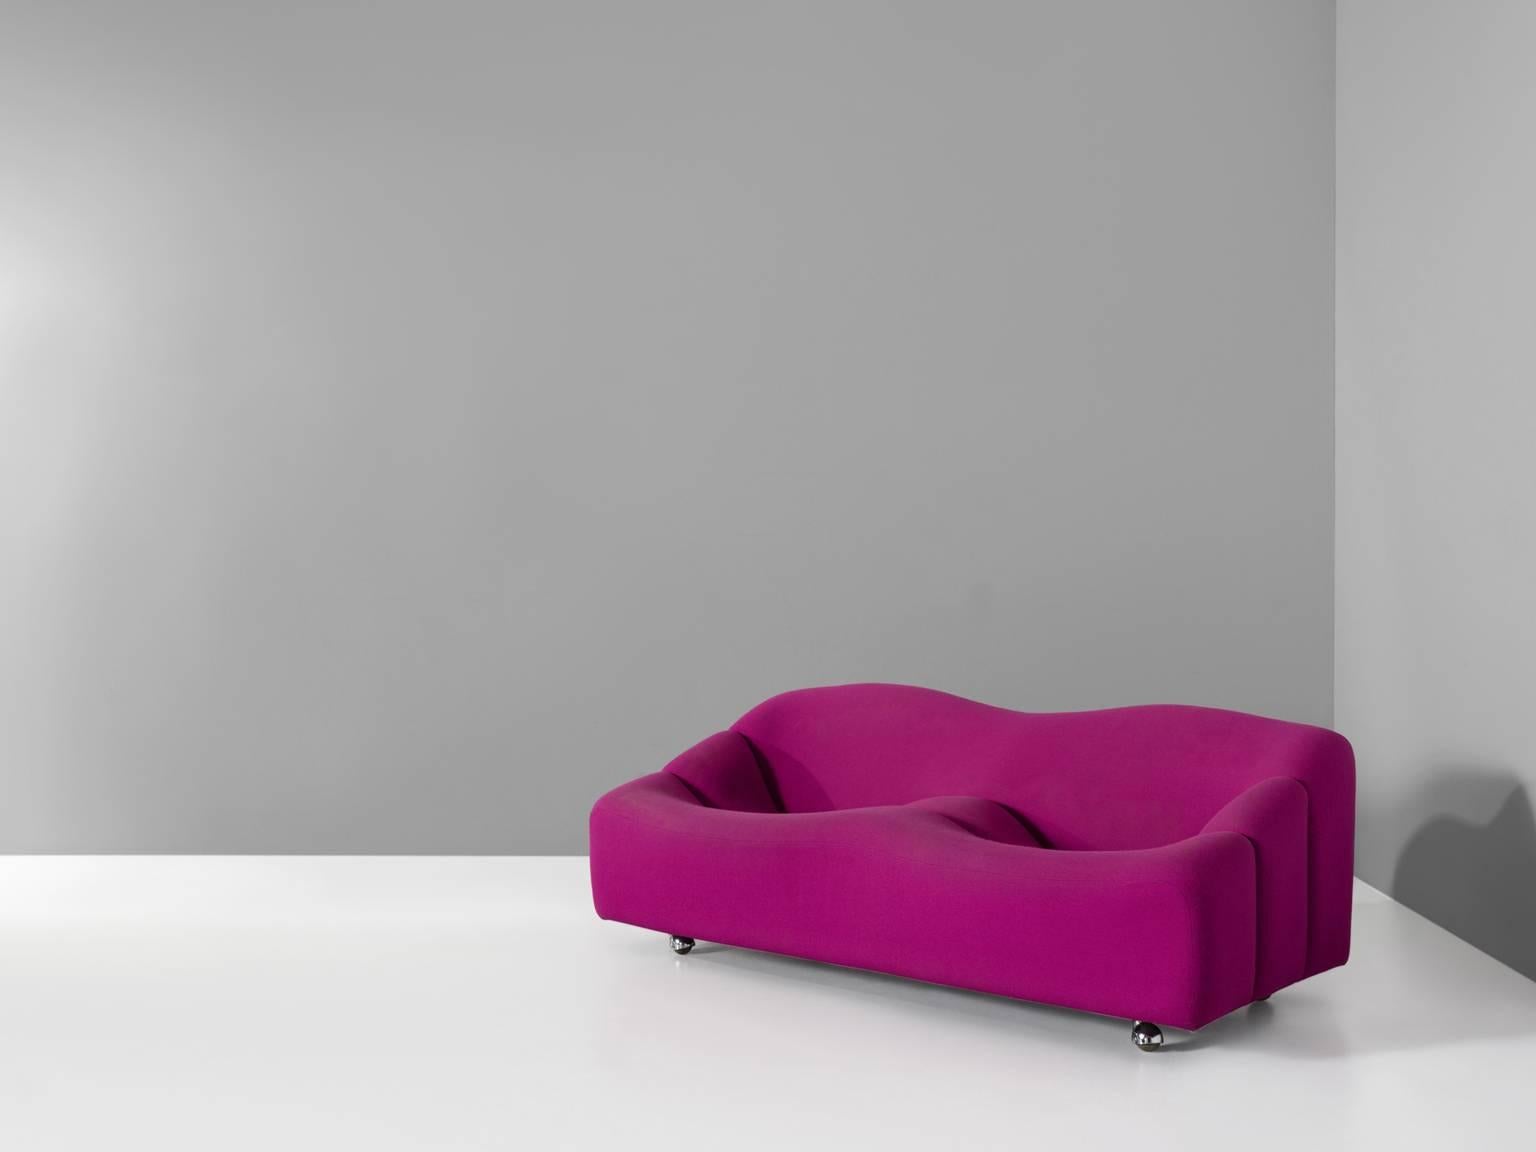 Two-seat sofa from the ABCD series, in fabric, wood and metal, by Pierre Paulin for Artifort, the Netherlands, circa 1968.

Loveseat in fuchsia colored upholstery. The shape of these modular elements reminds of an egg-box. Beautifully curved and